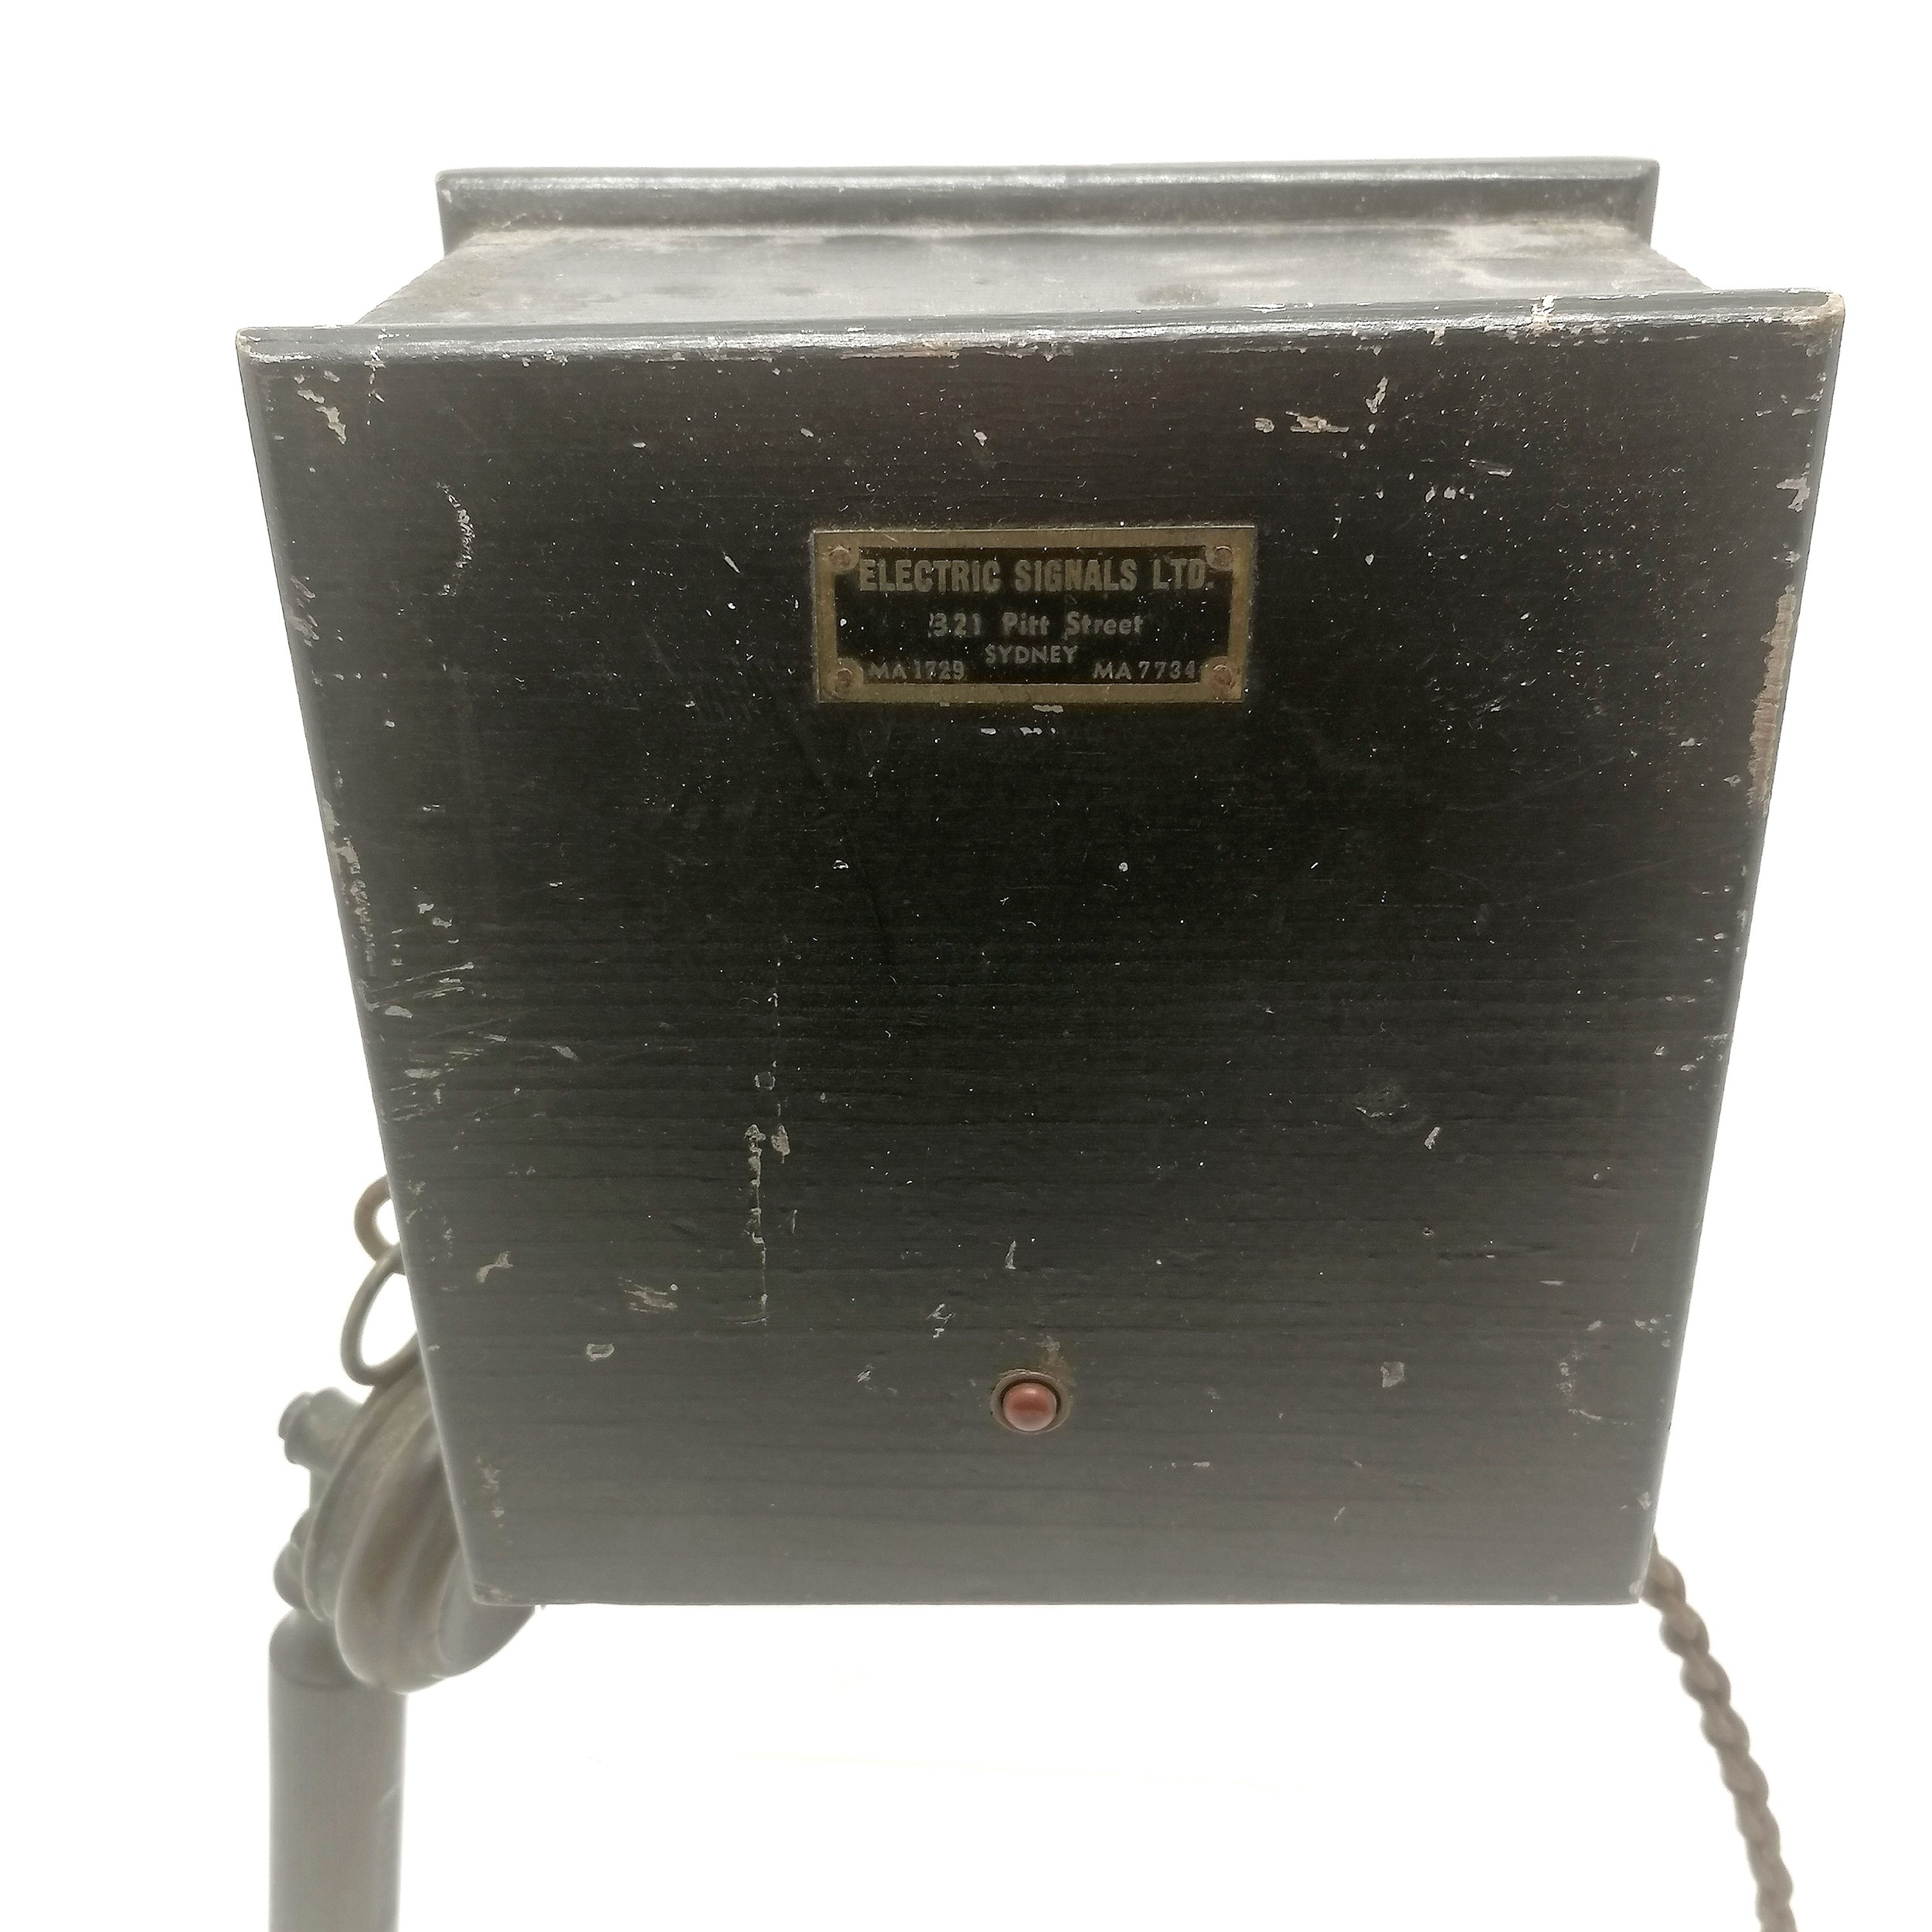 Electric Signals Ltd, Sydney railway telephone with morse code button to front - receiver length - Image 4 of 5